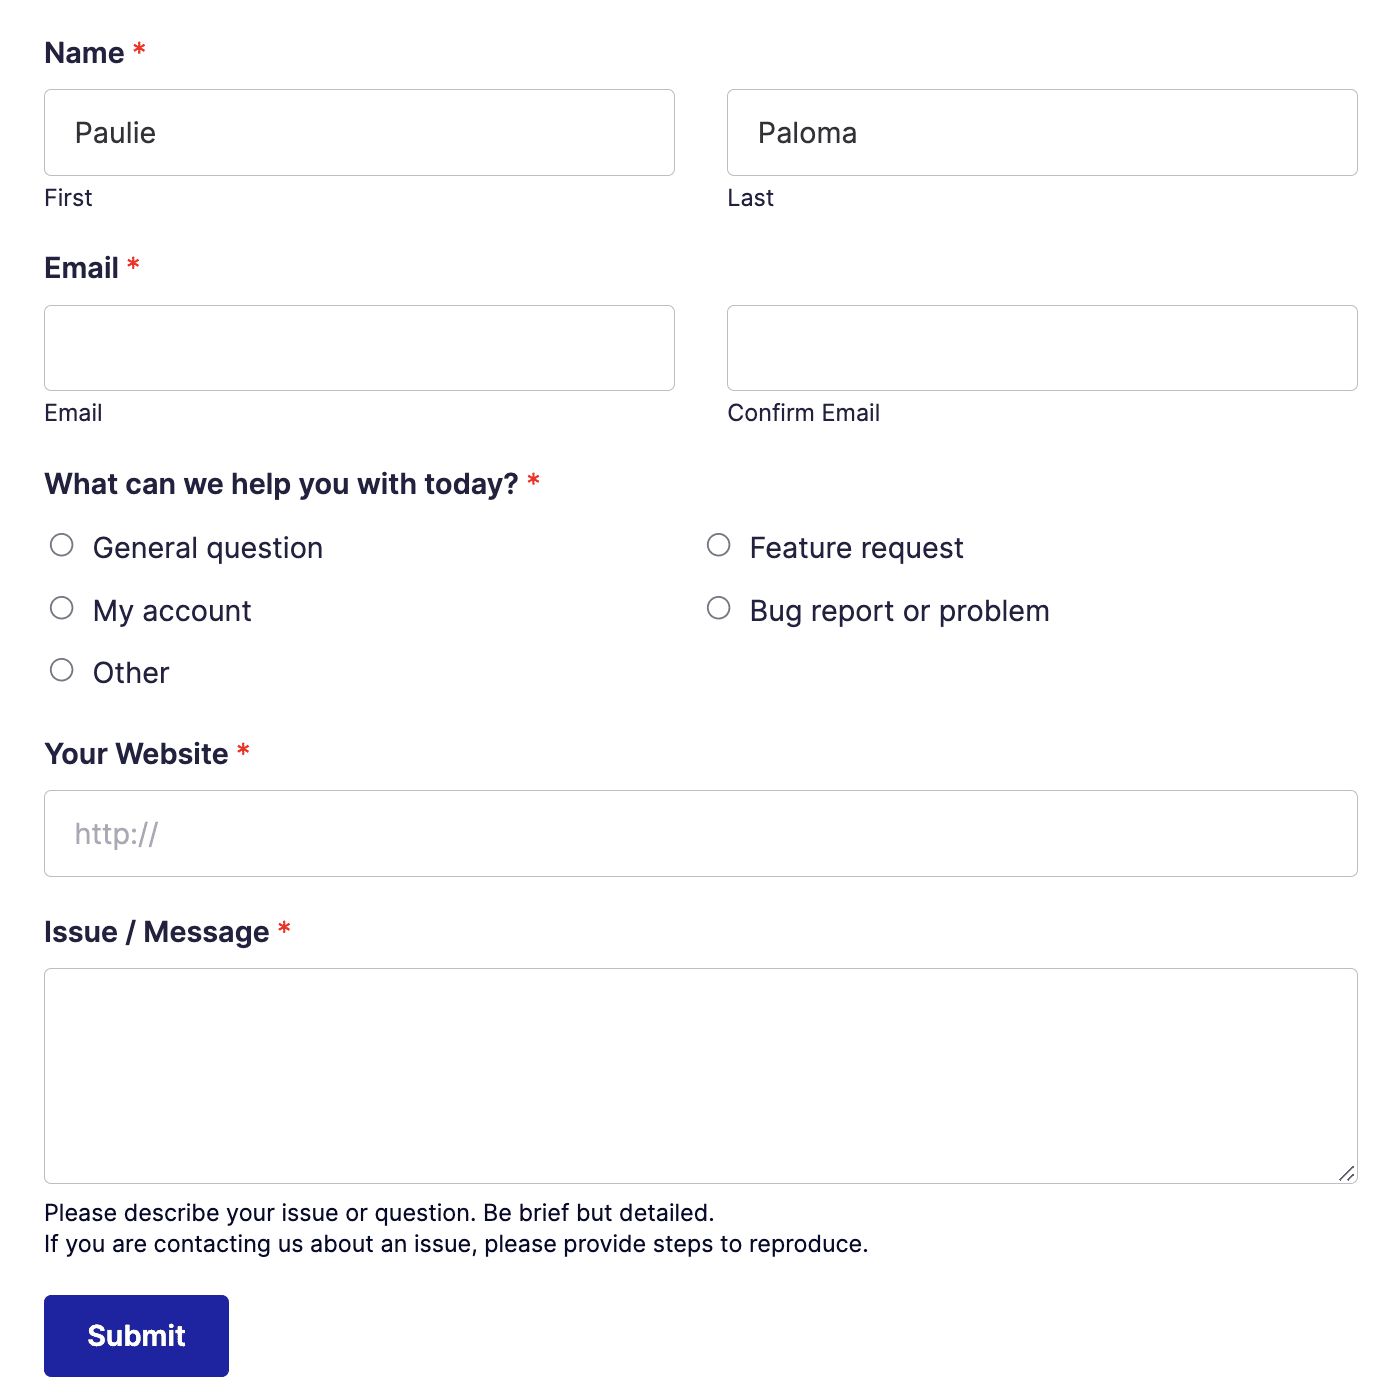 The support ticket request form